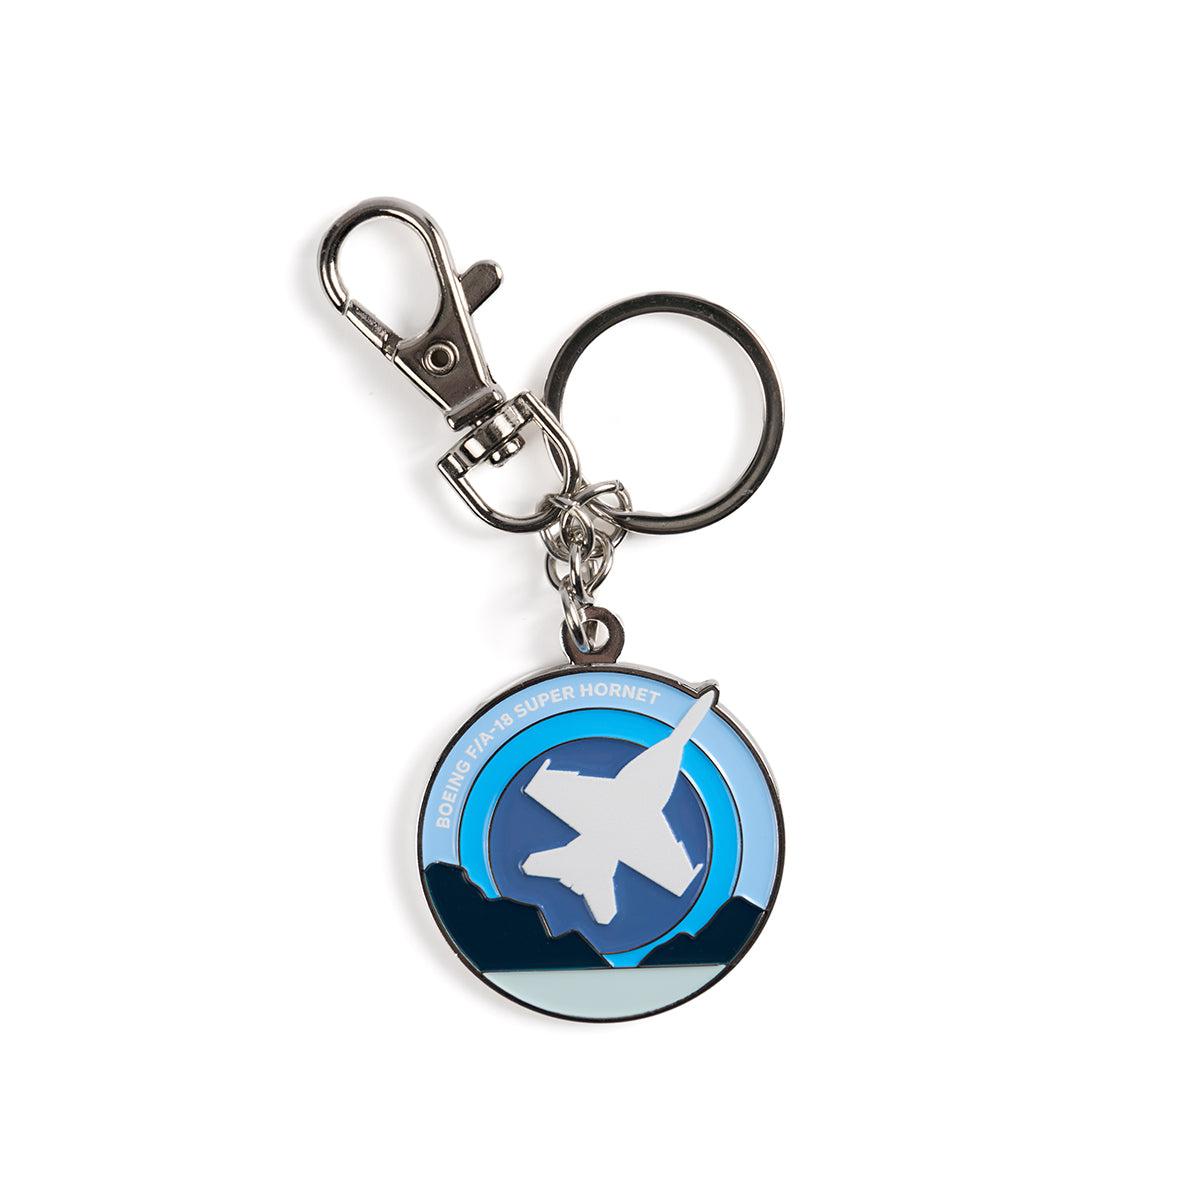 Skyward keychain, featuring the iconic Boeing F/A-18 Super Hornet in a roundel design.